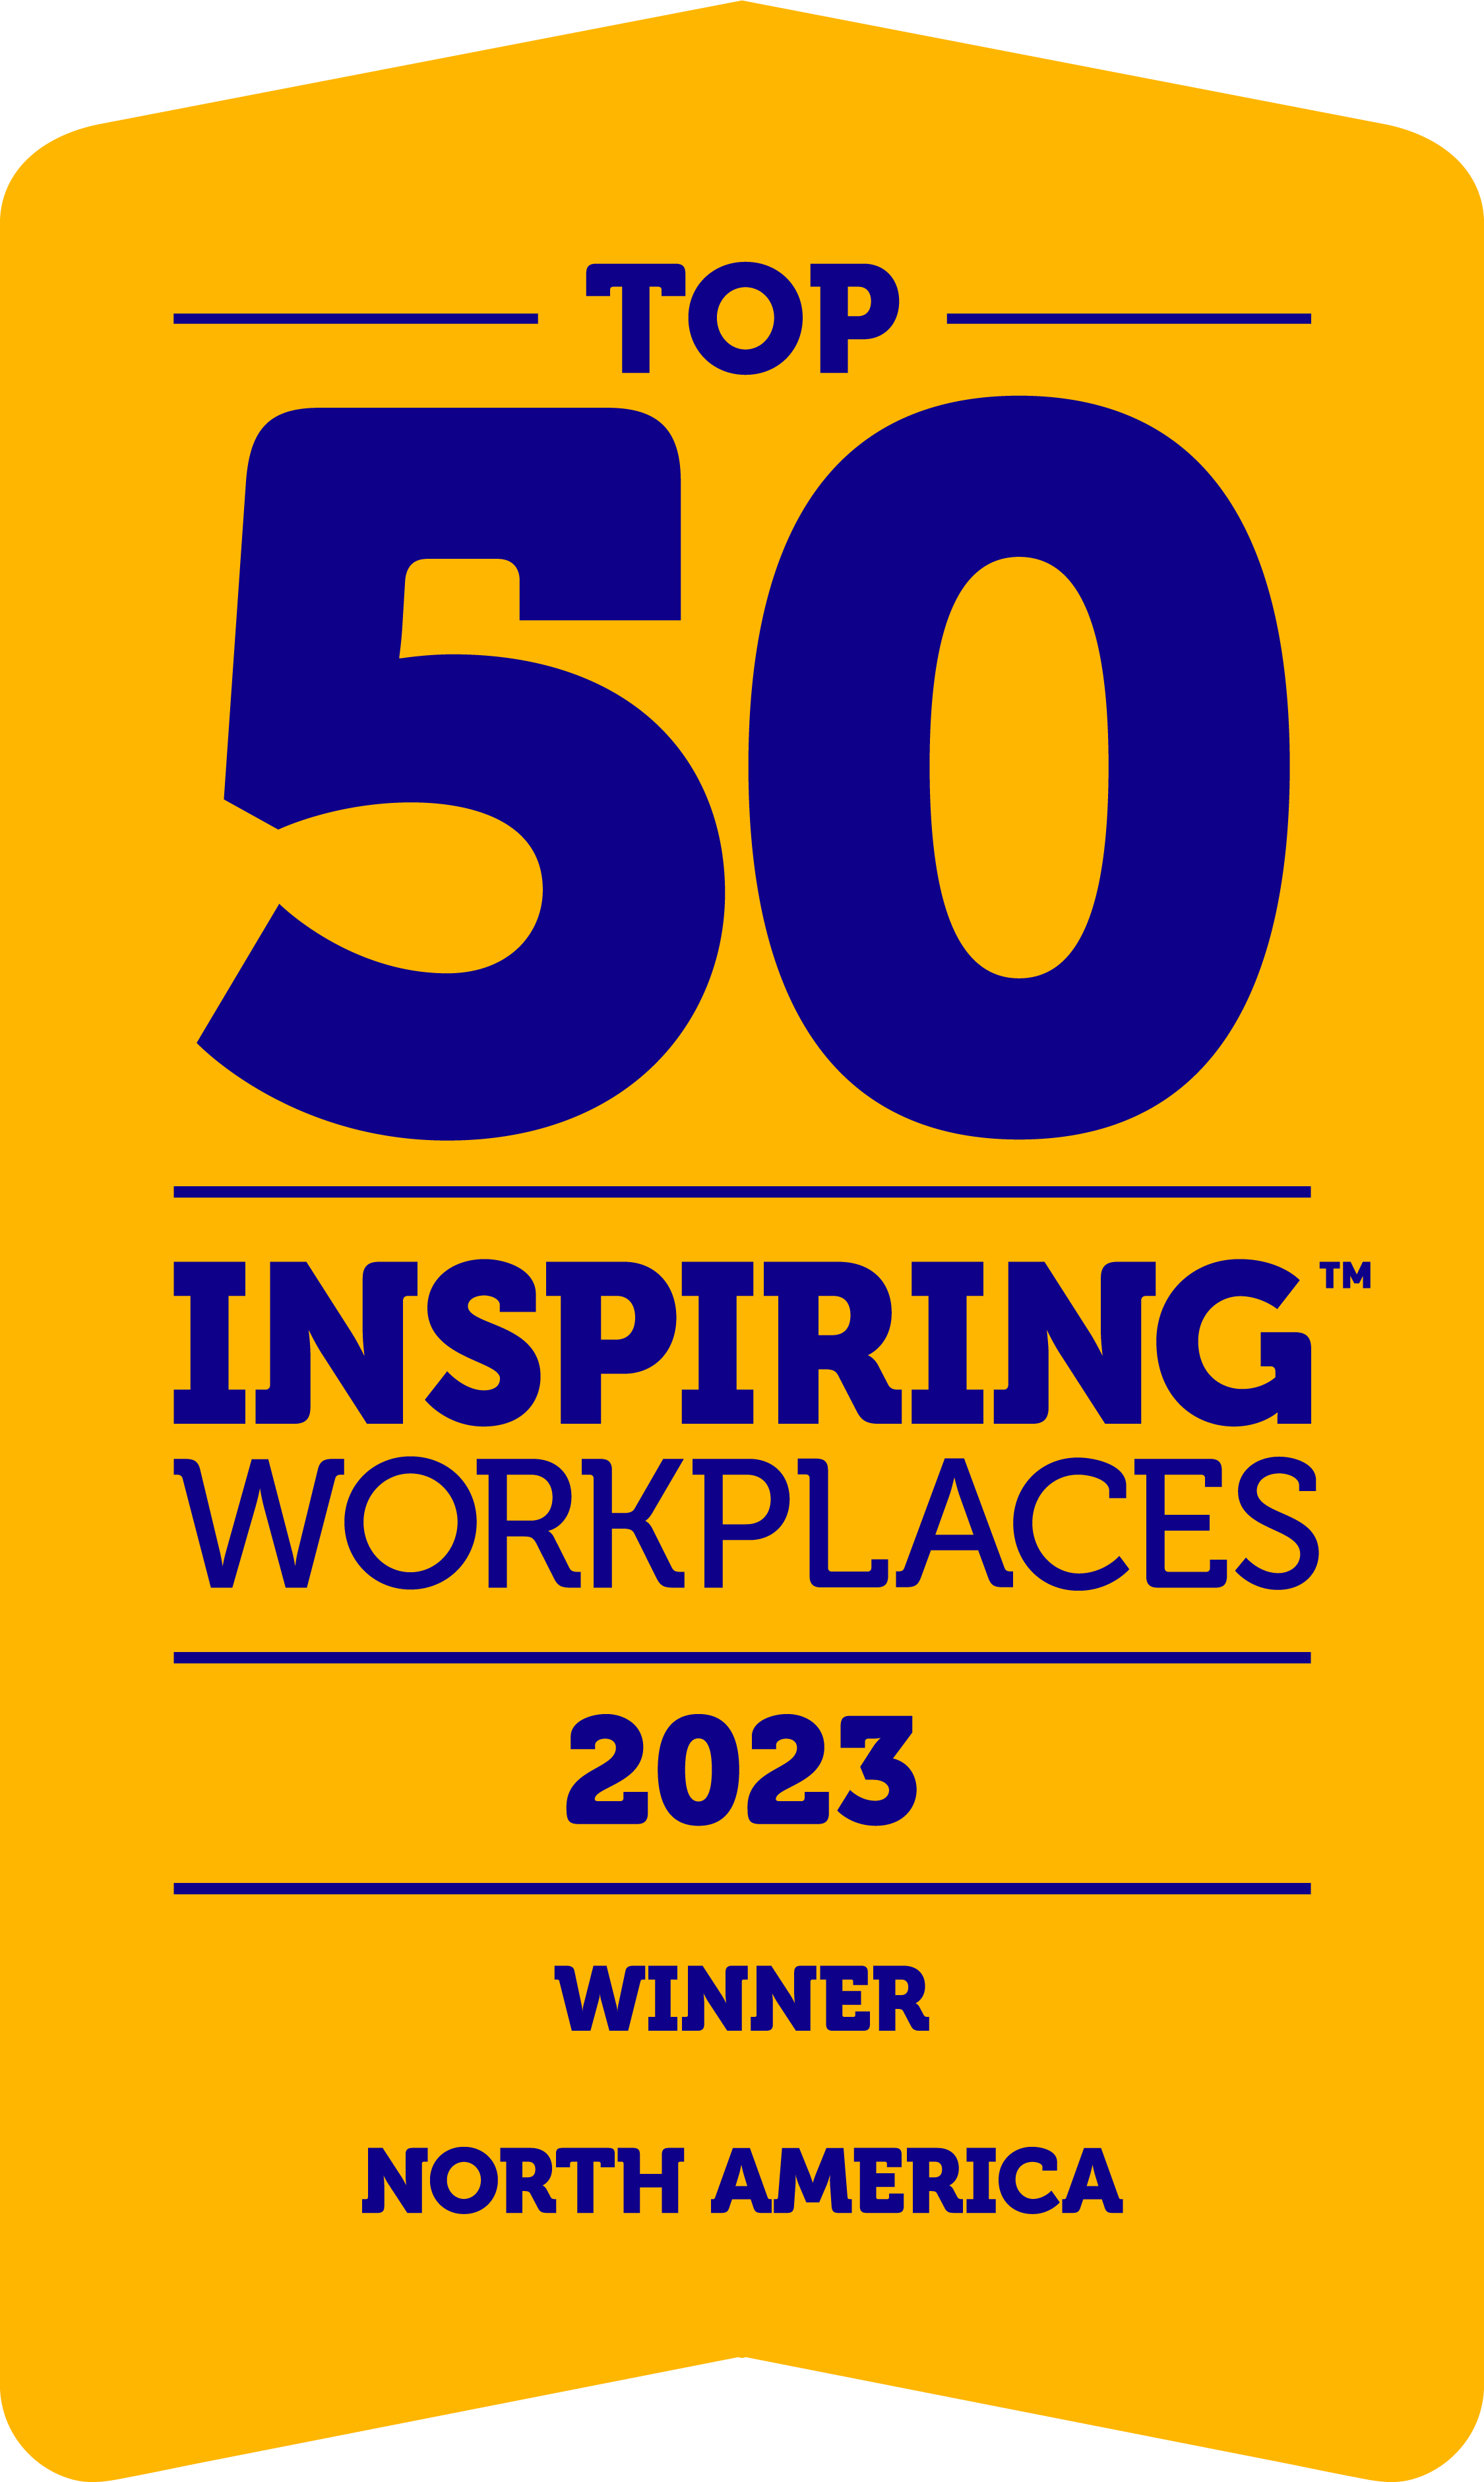 Valor is recognized as a finalist for the top 50 Inspiring Workplaces